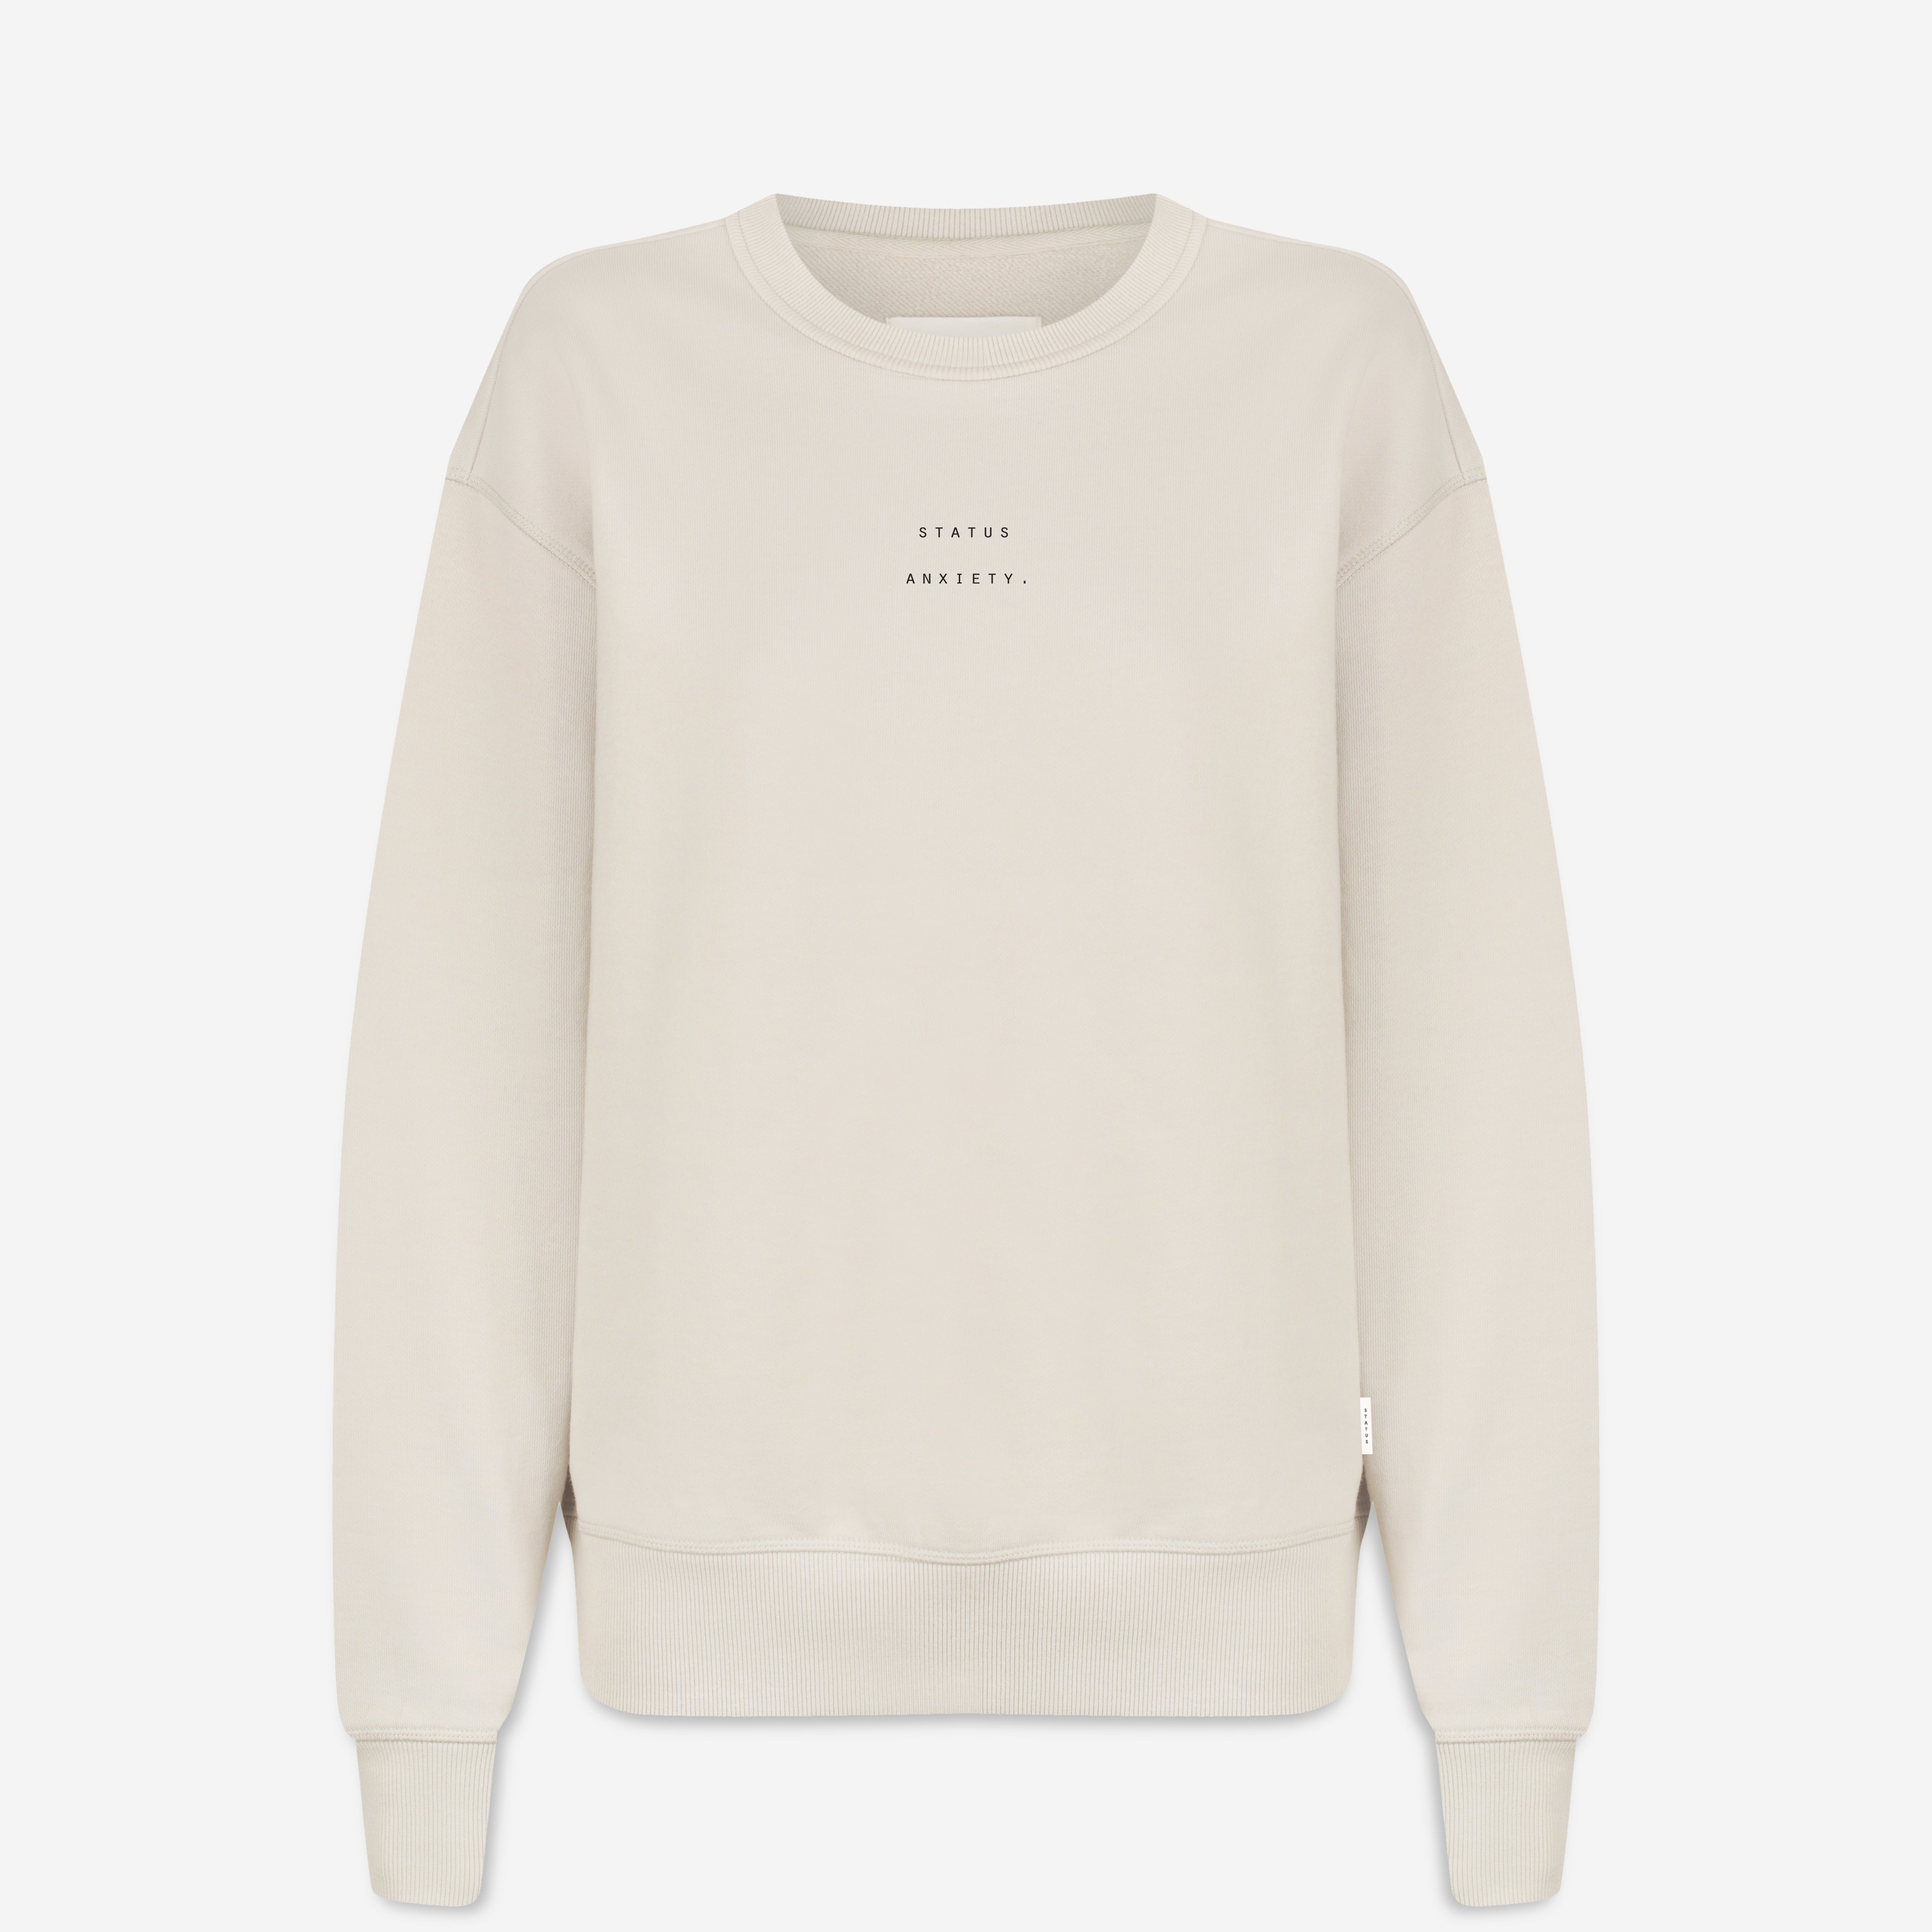 Could Be Nice Logo - Women's Classic Crew / Dove Grey